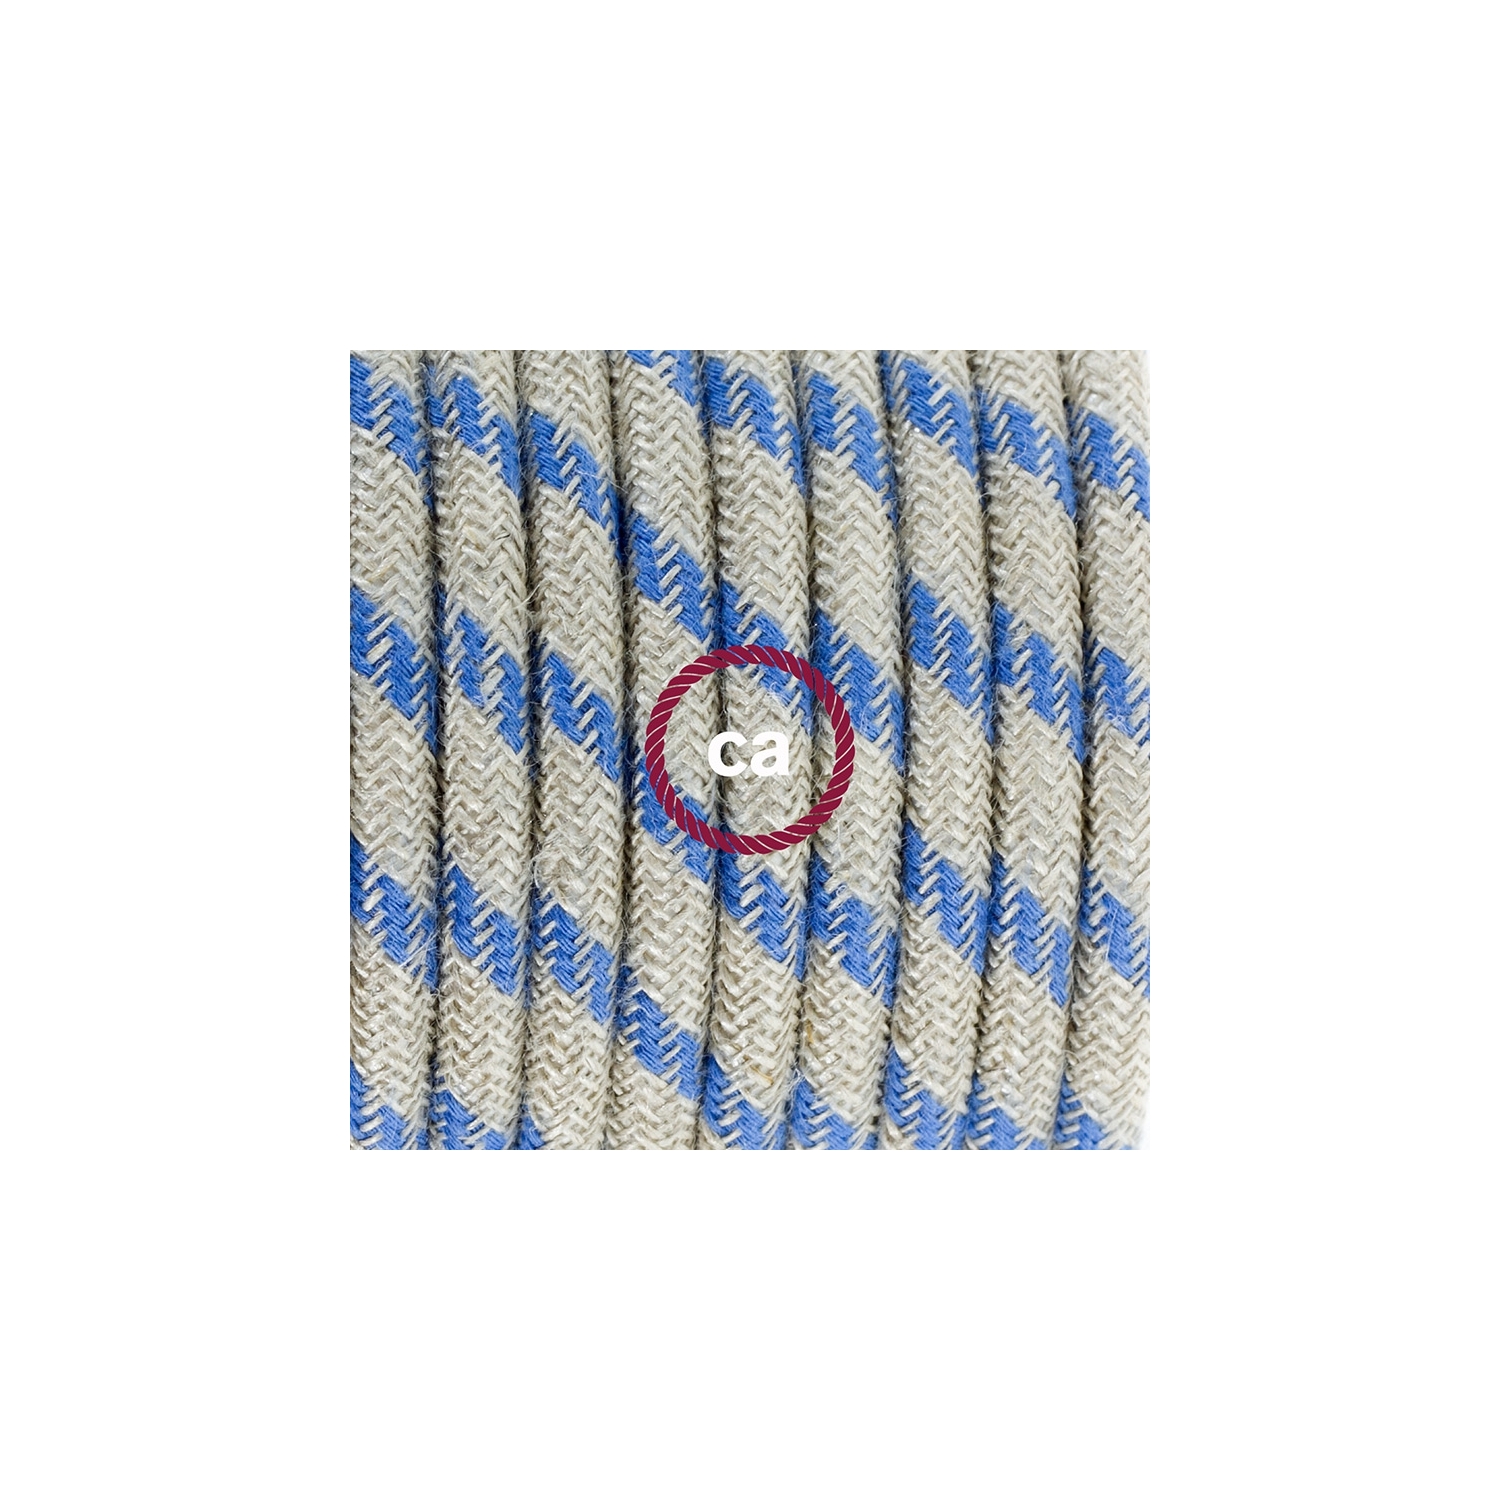 Plug-in Pendant with switch on socket | RD55 Natural & Blue Linen Stripe